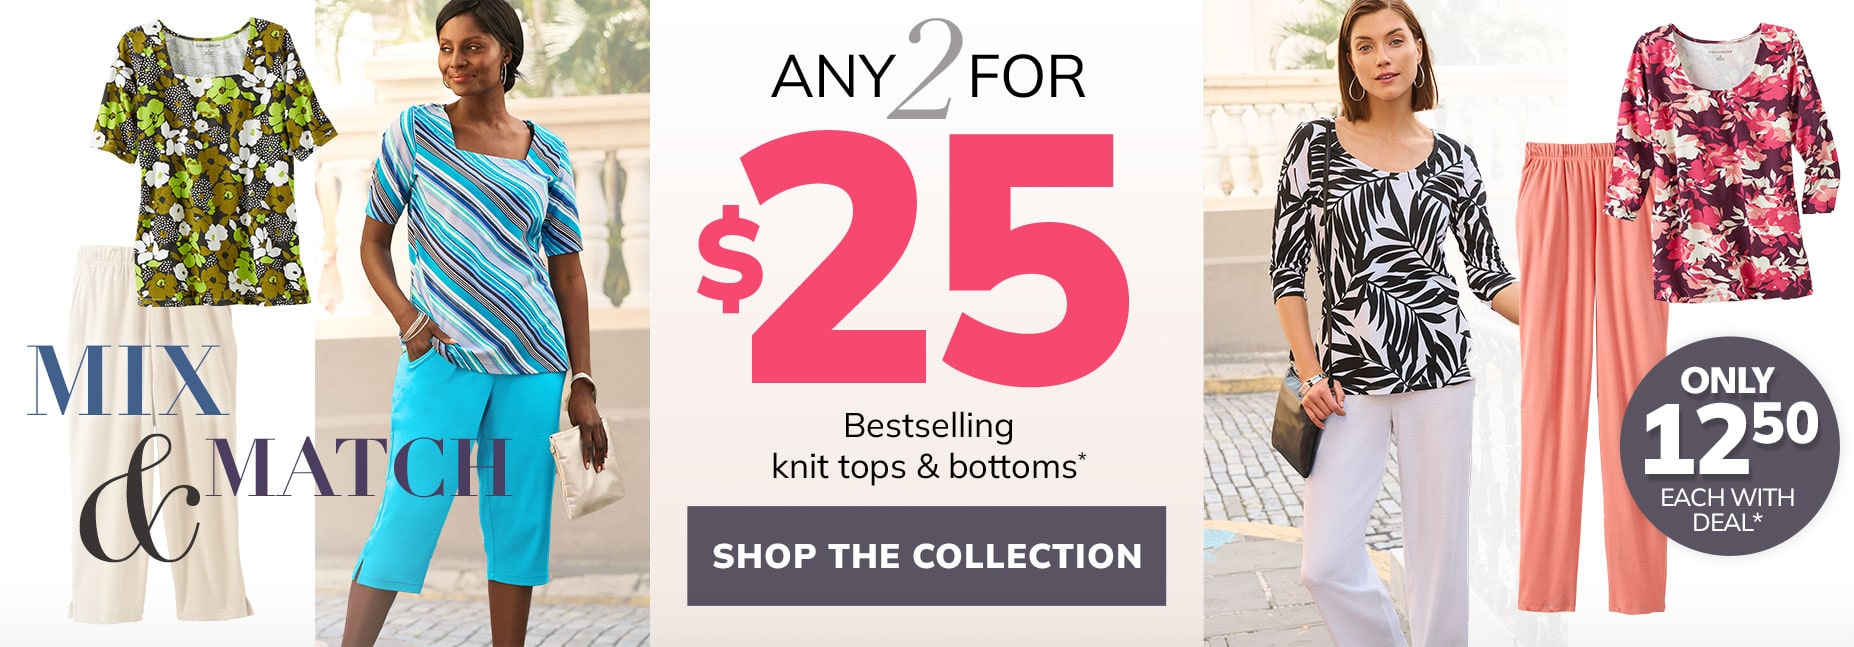 2 for $25 - Mix & Match - Knit Tops & Bottoms